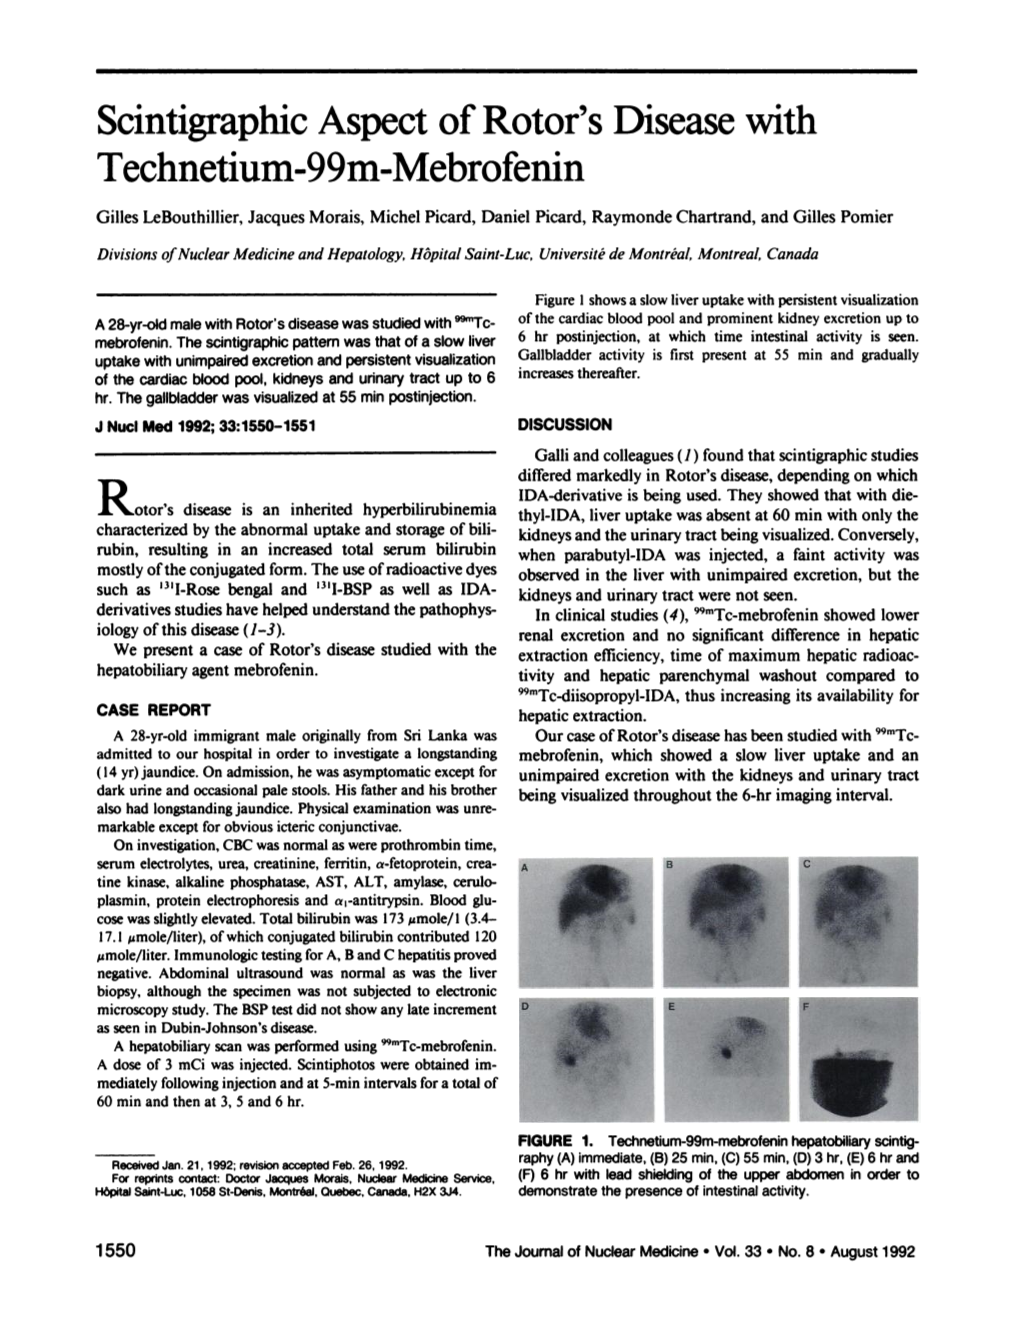 Scintigraphicaspect of Rotor's Disease with Technetium-99M-.Mebrofemn